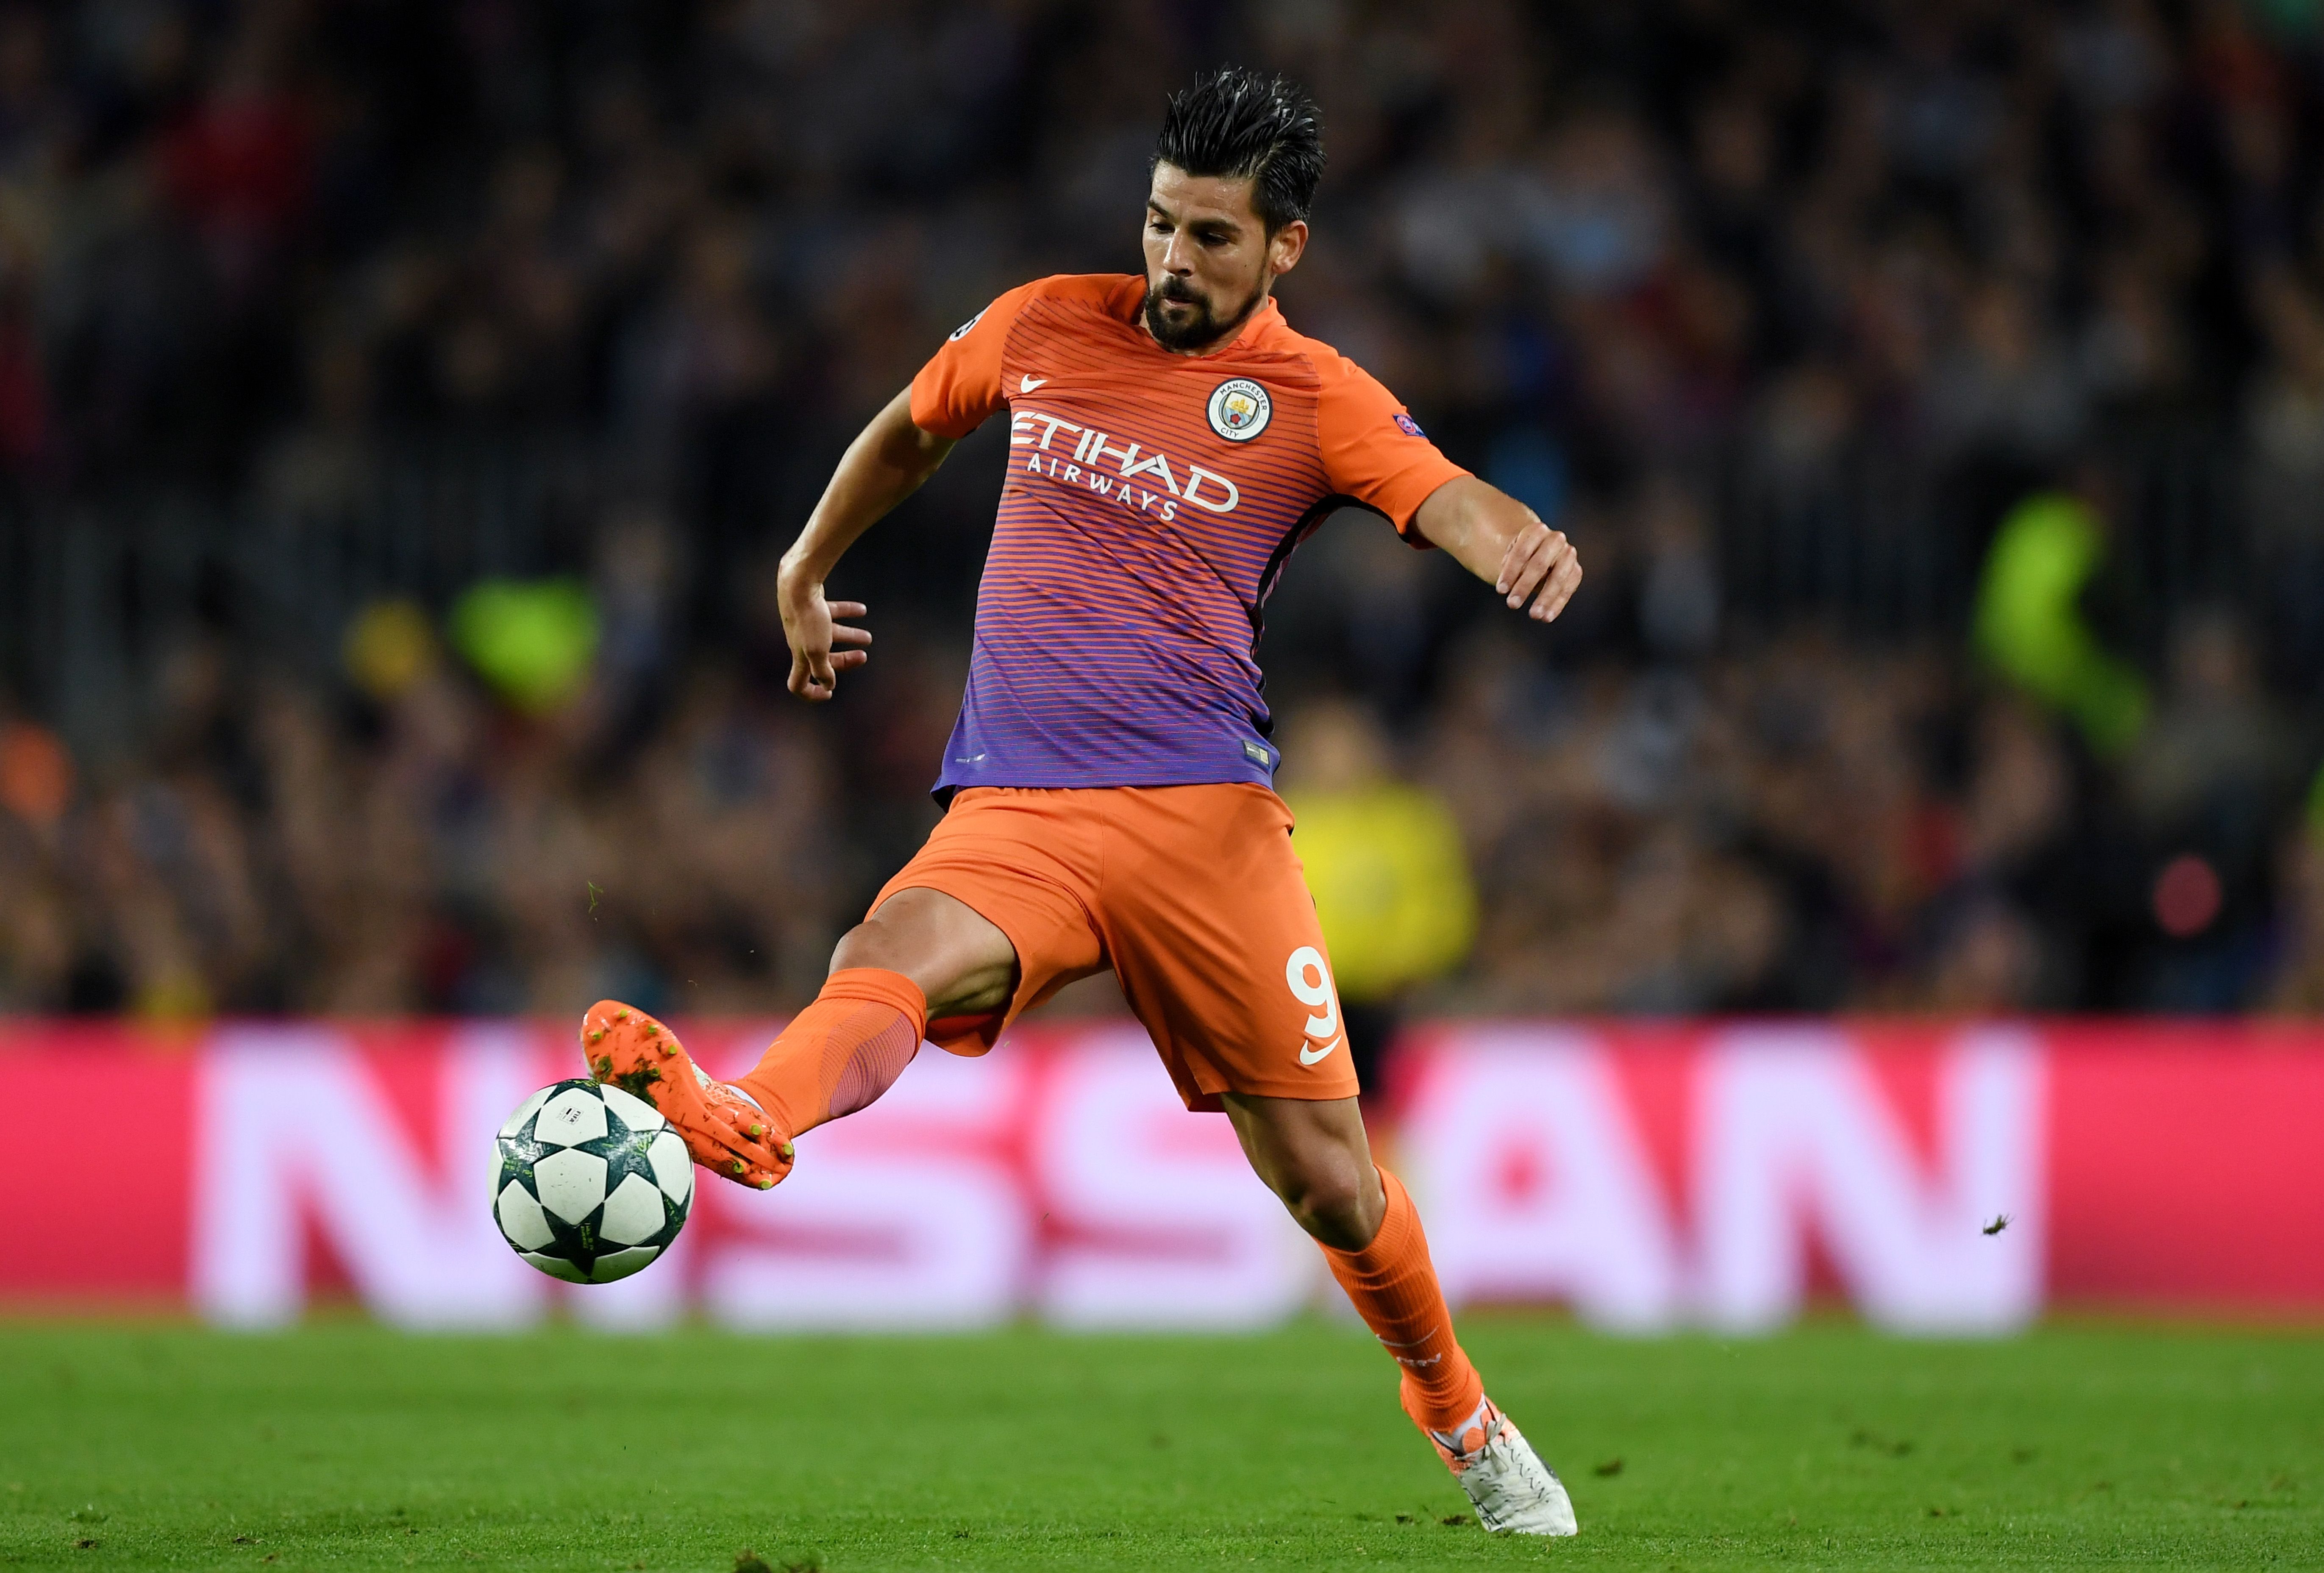 Nolito in action for City